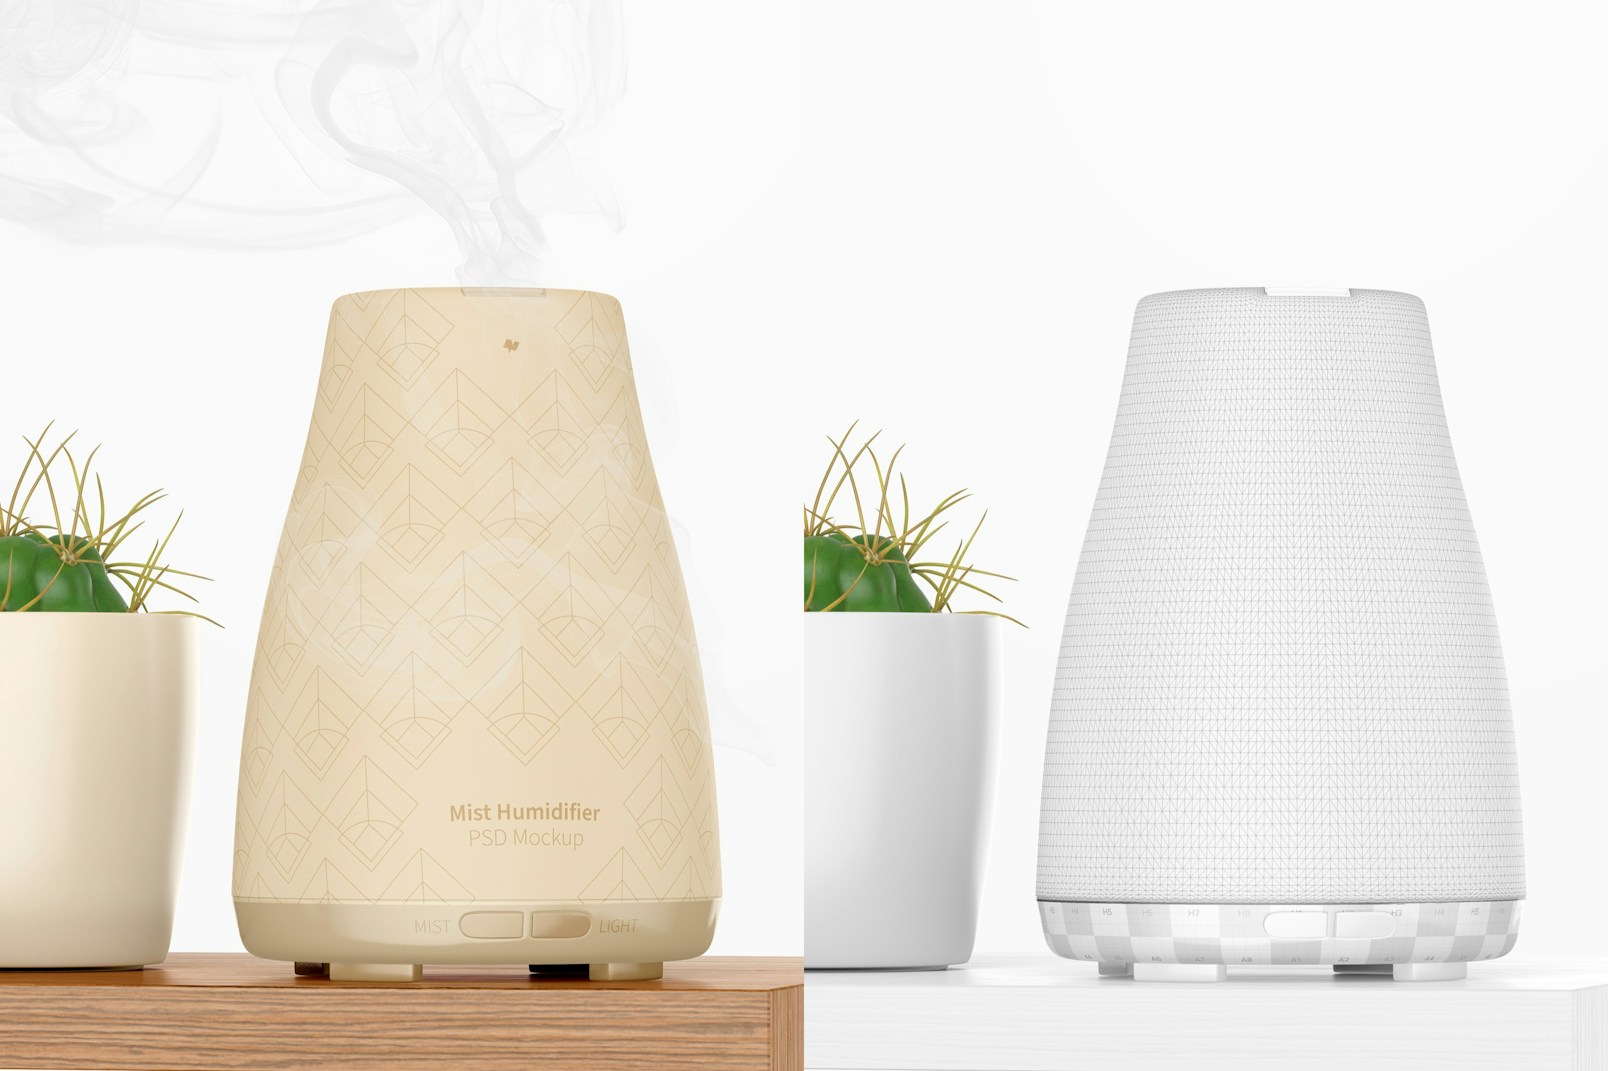 Mist Humidifier Mockup, Front View